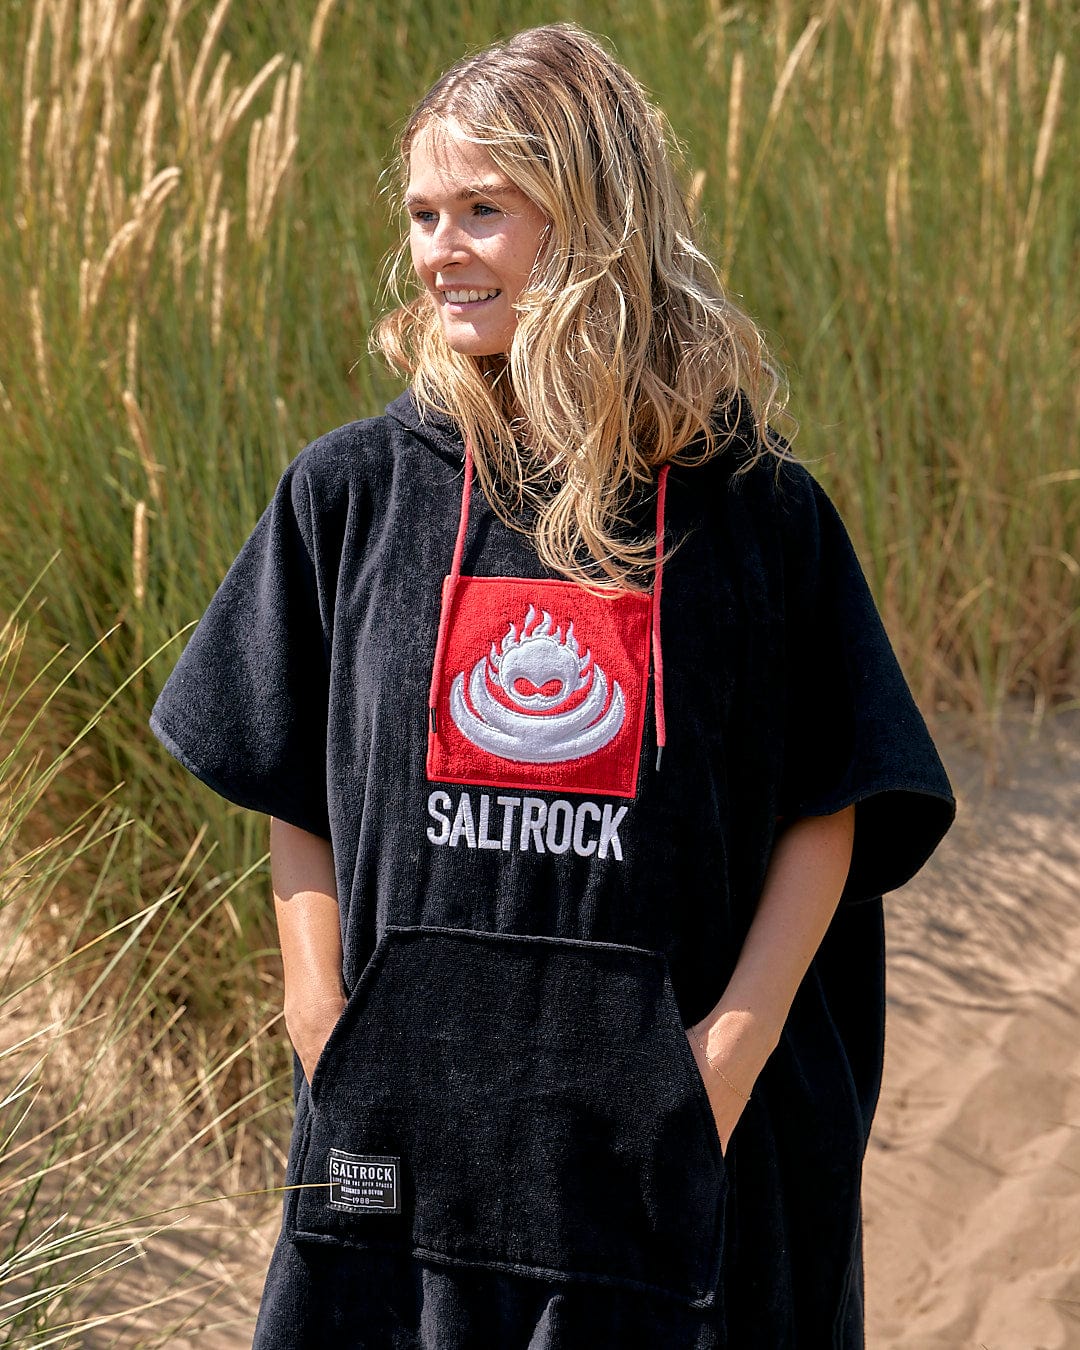 A person wearing a Saltrock Corp Changing Towel - Black standing on a sandy beach with tall grass in the background.